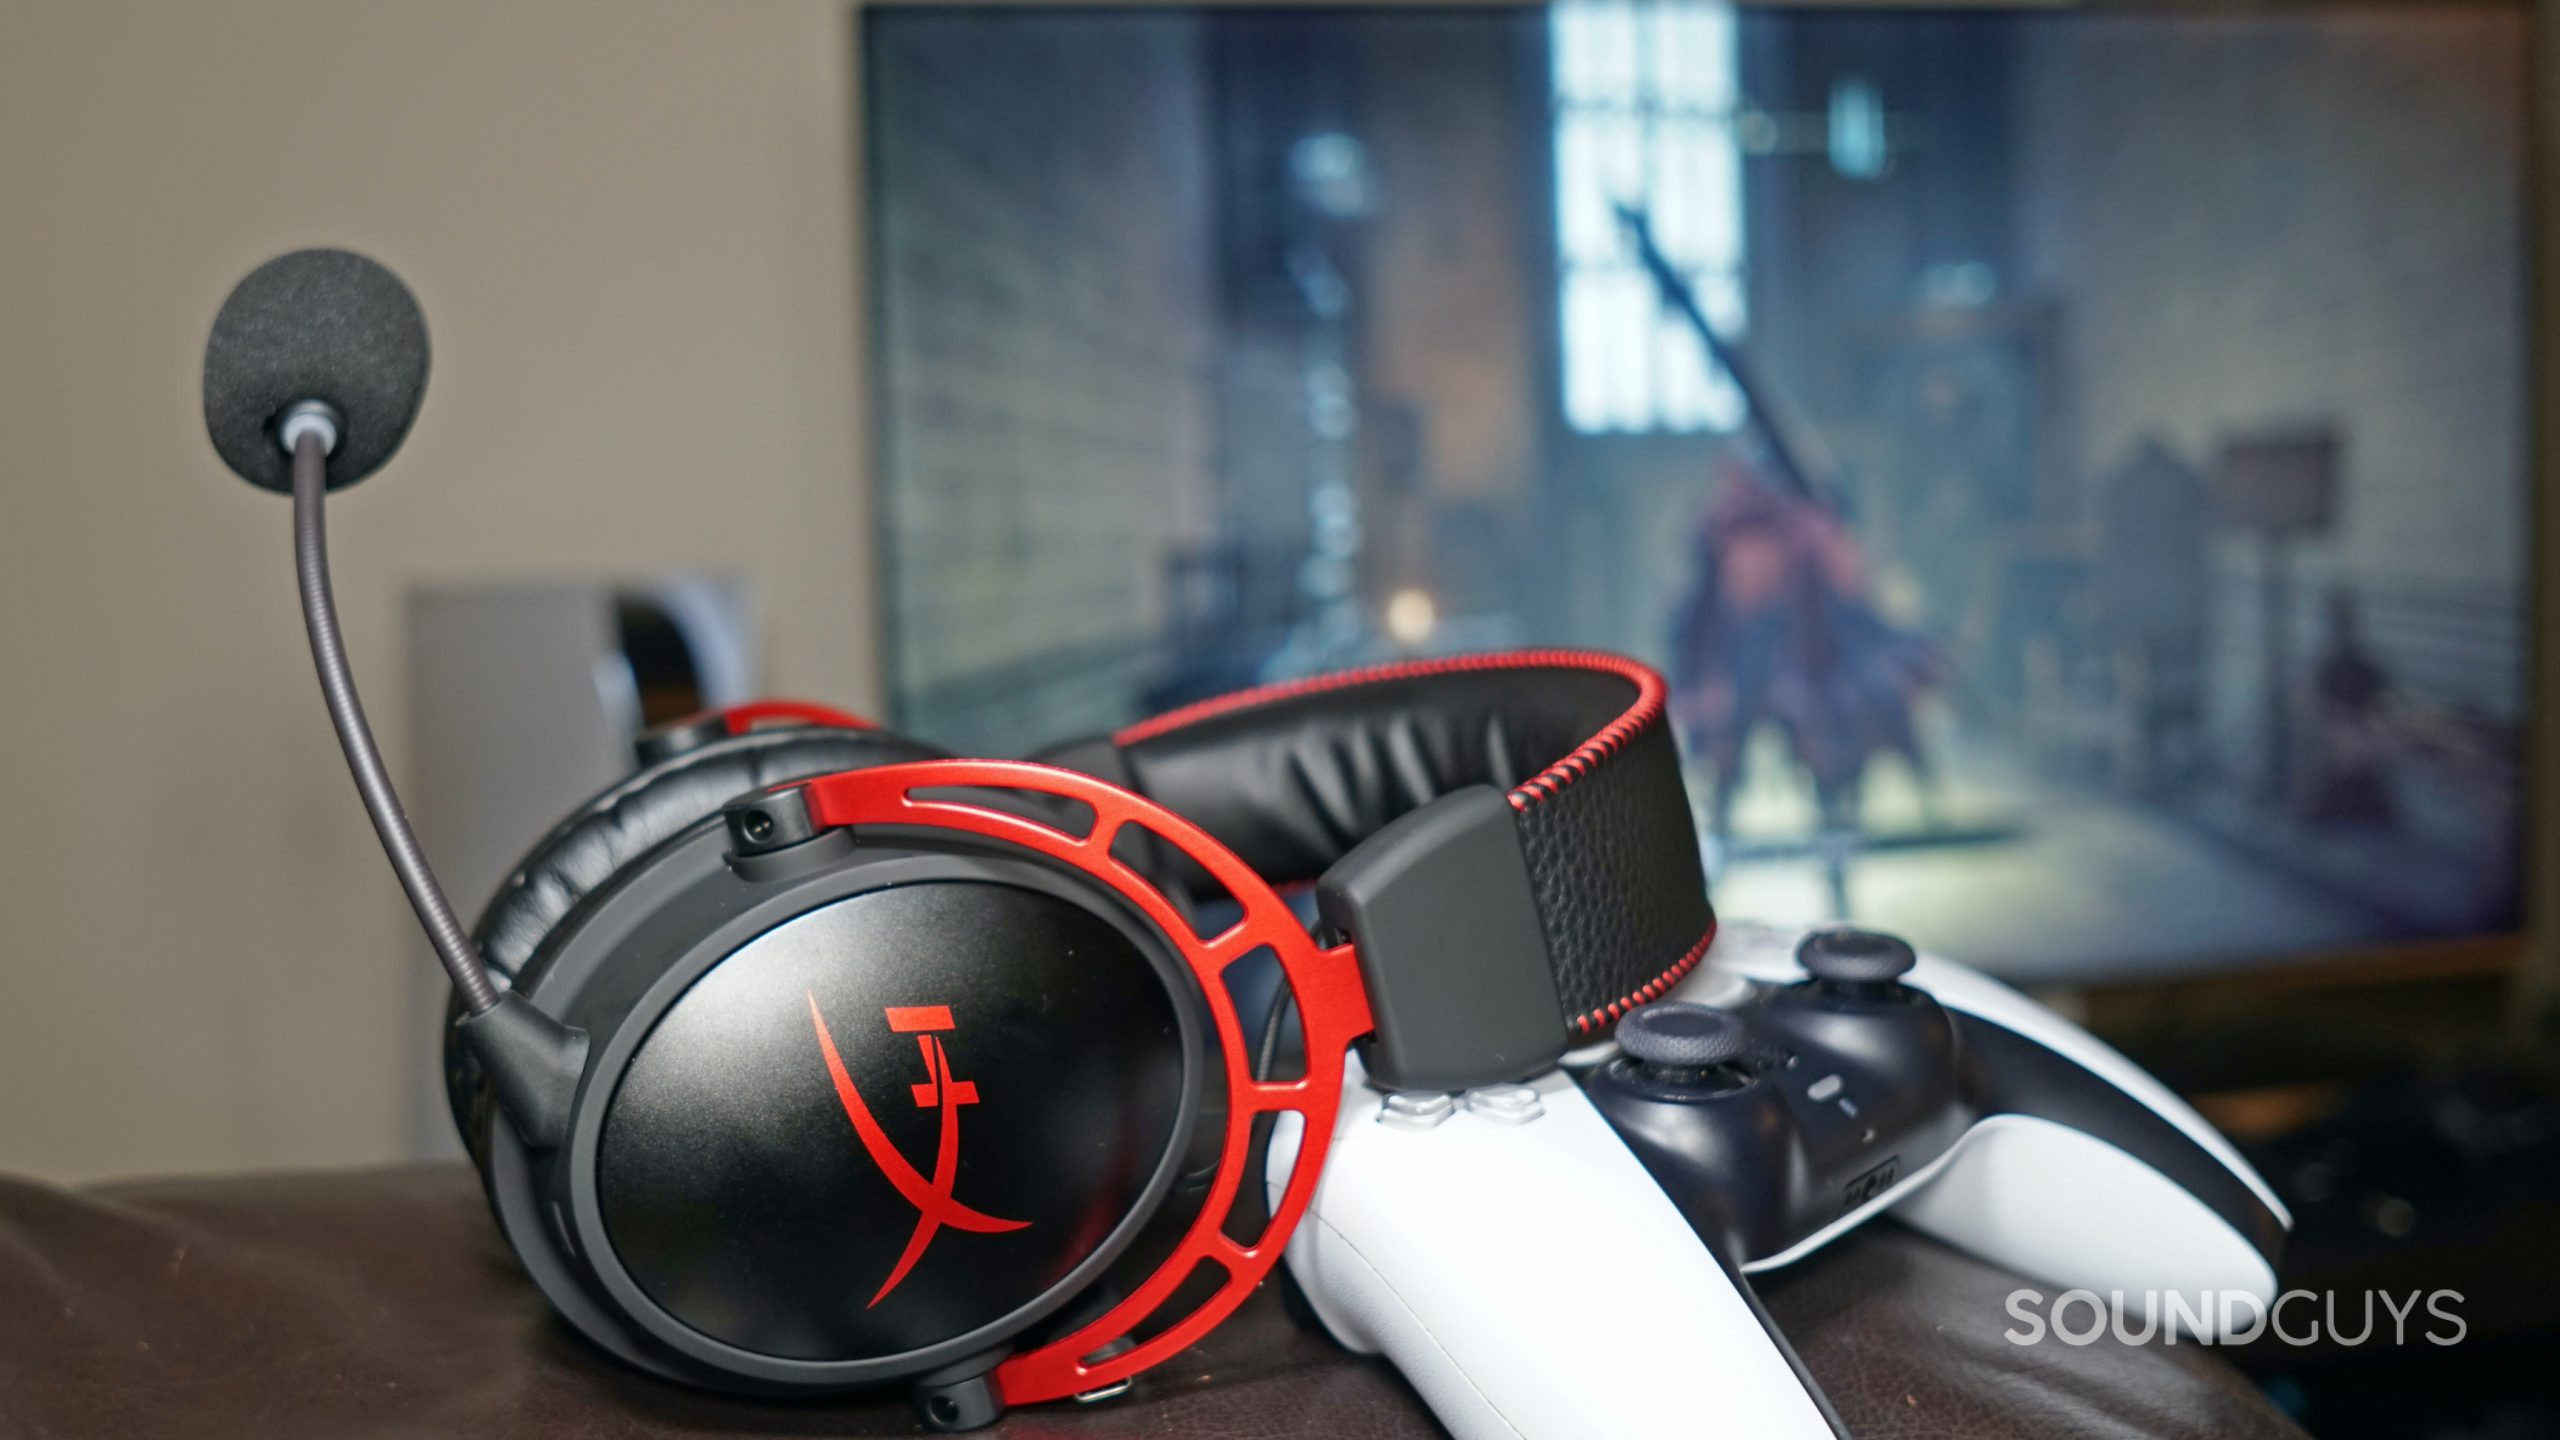 The HyperX Cloud Alpha Wireless leans on a PlayStation DualSense controller on a leather couch, with a PlayStation 5 console standing next to a TV displaying Elden Ring in the background.